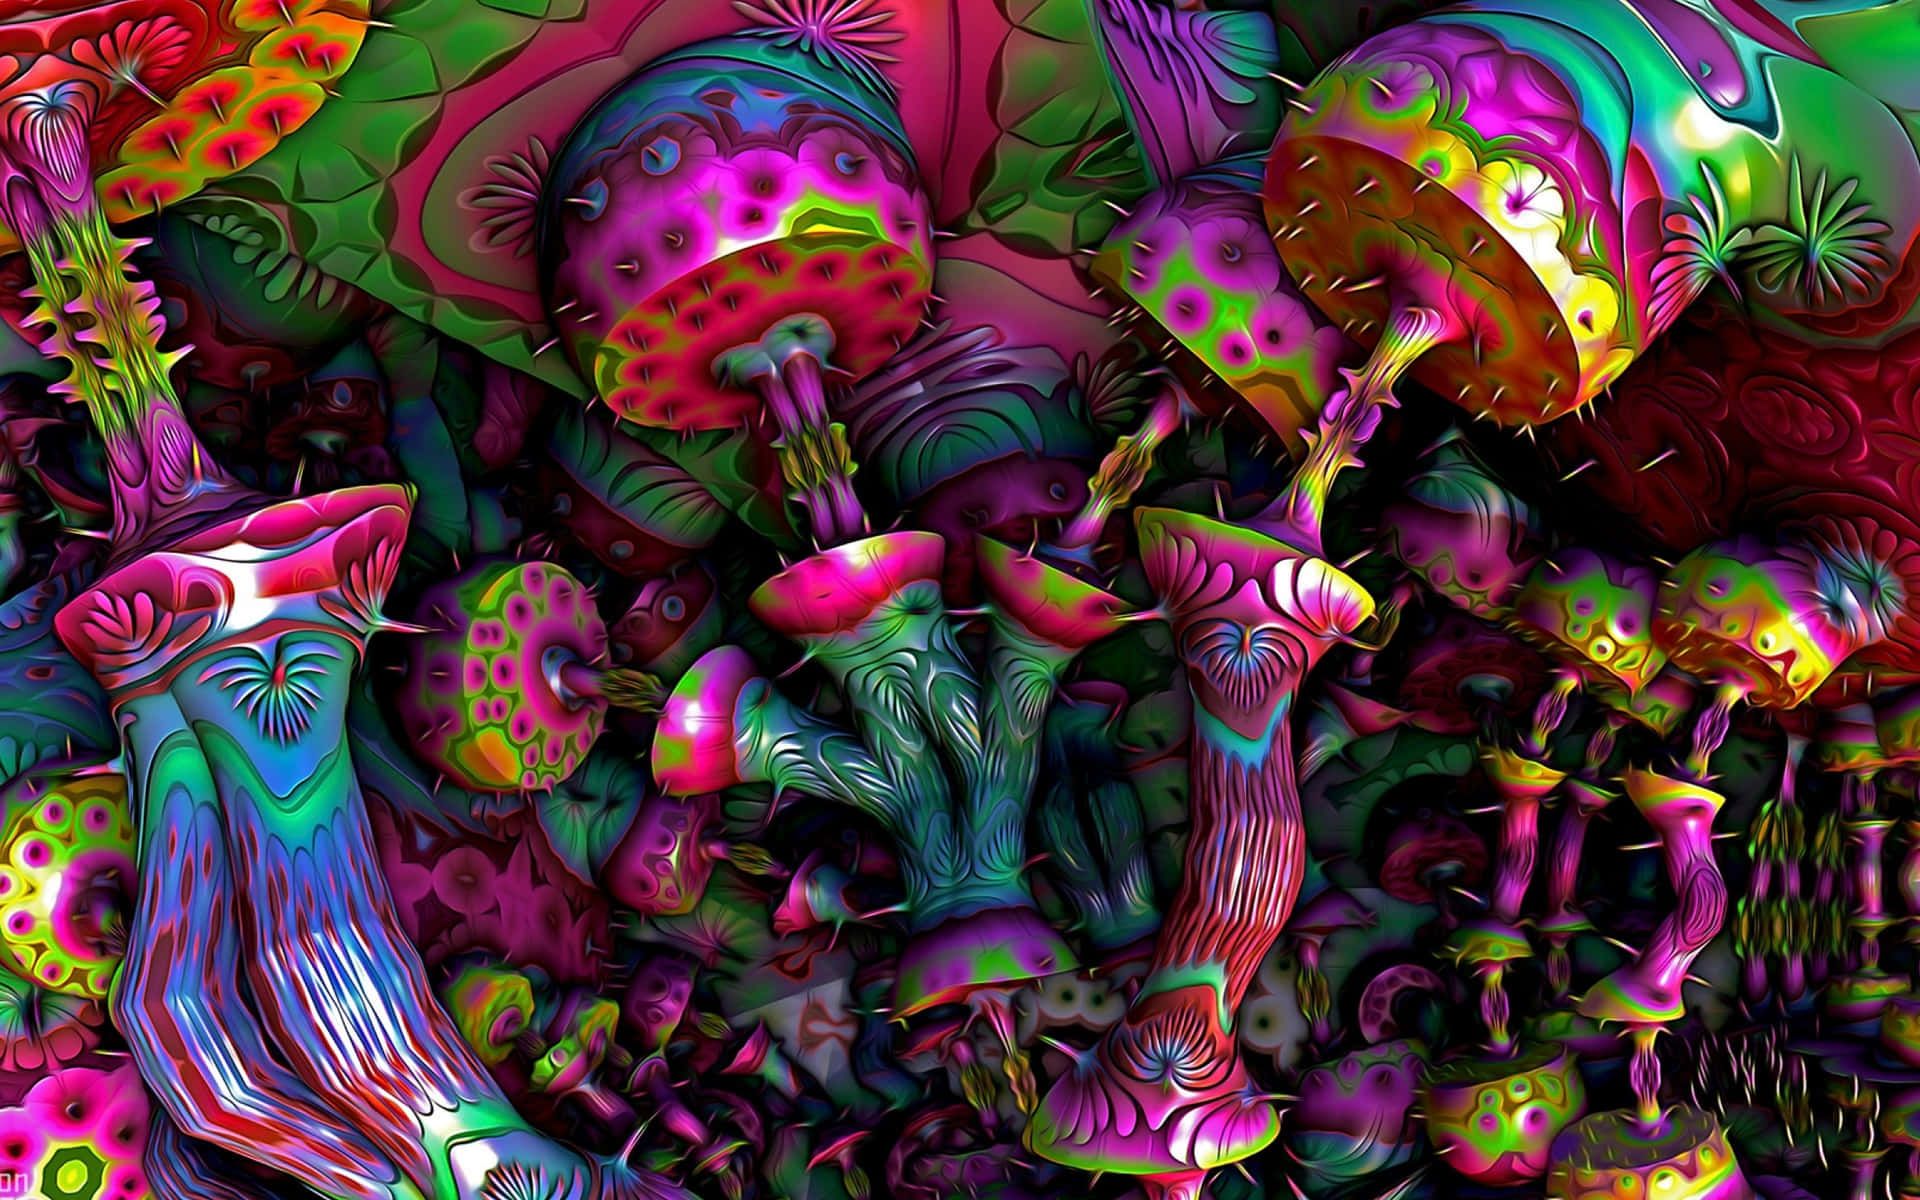 A photo of a pile of mushrooms that have been photoshopped to look like they are glowing in the dark - Psychedelic